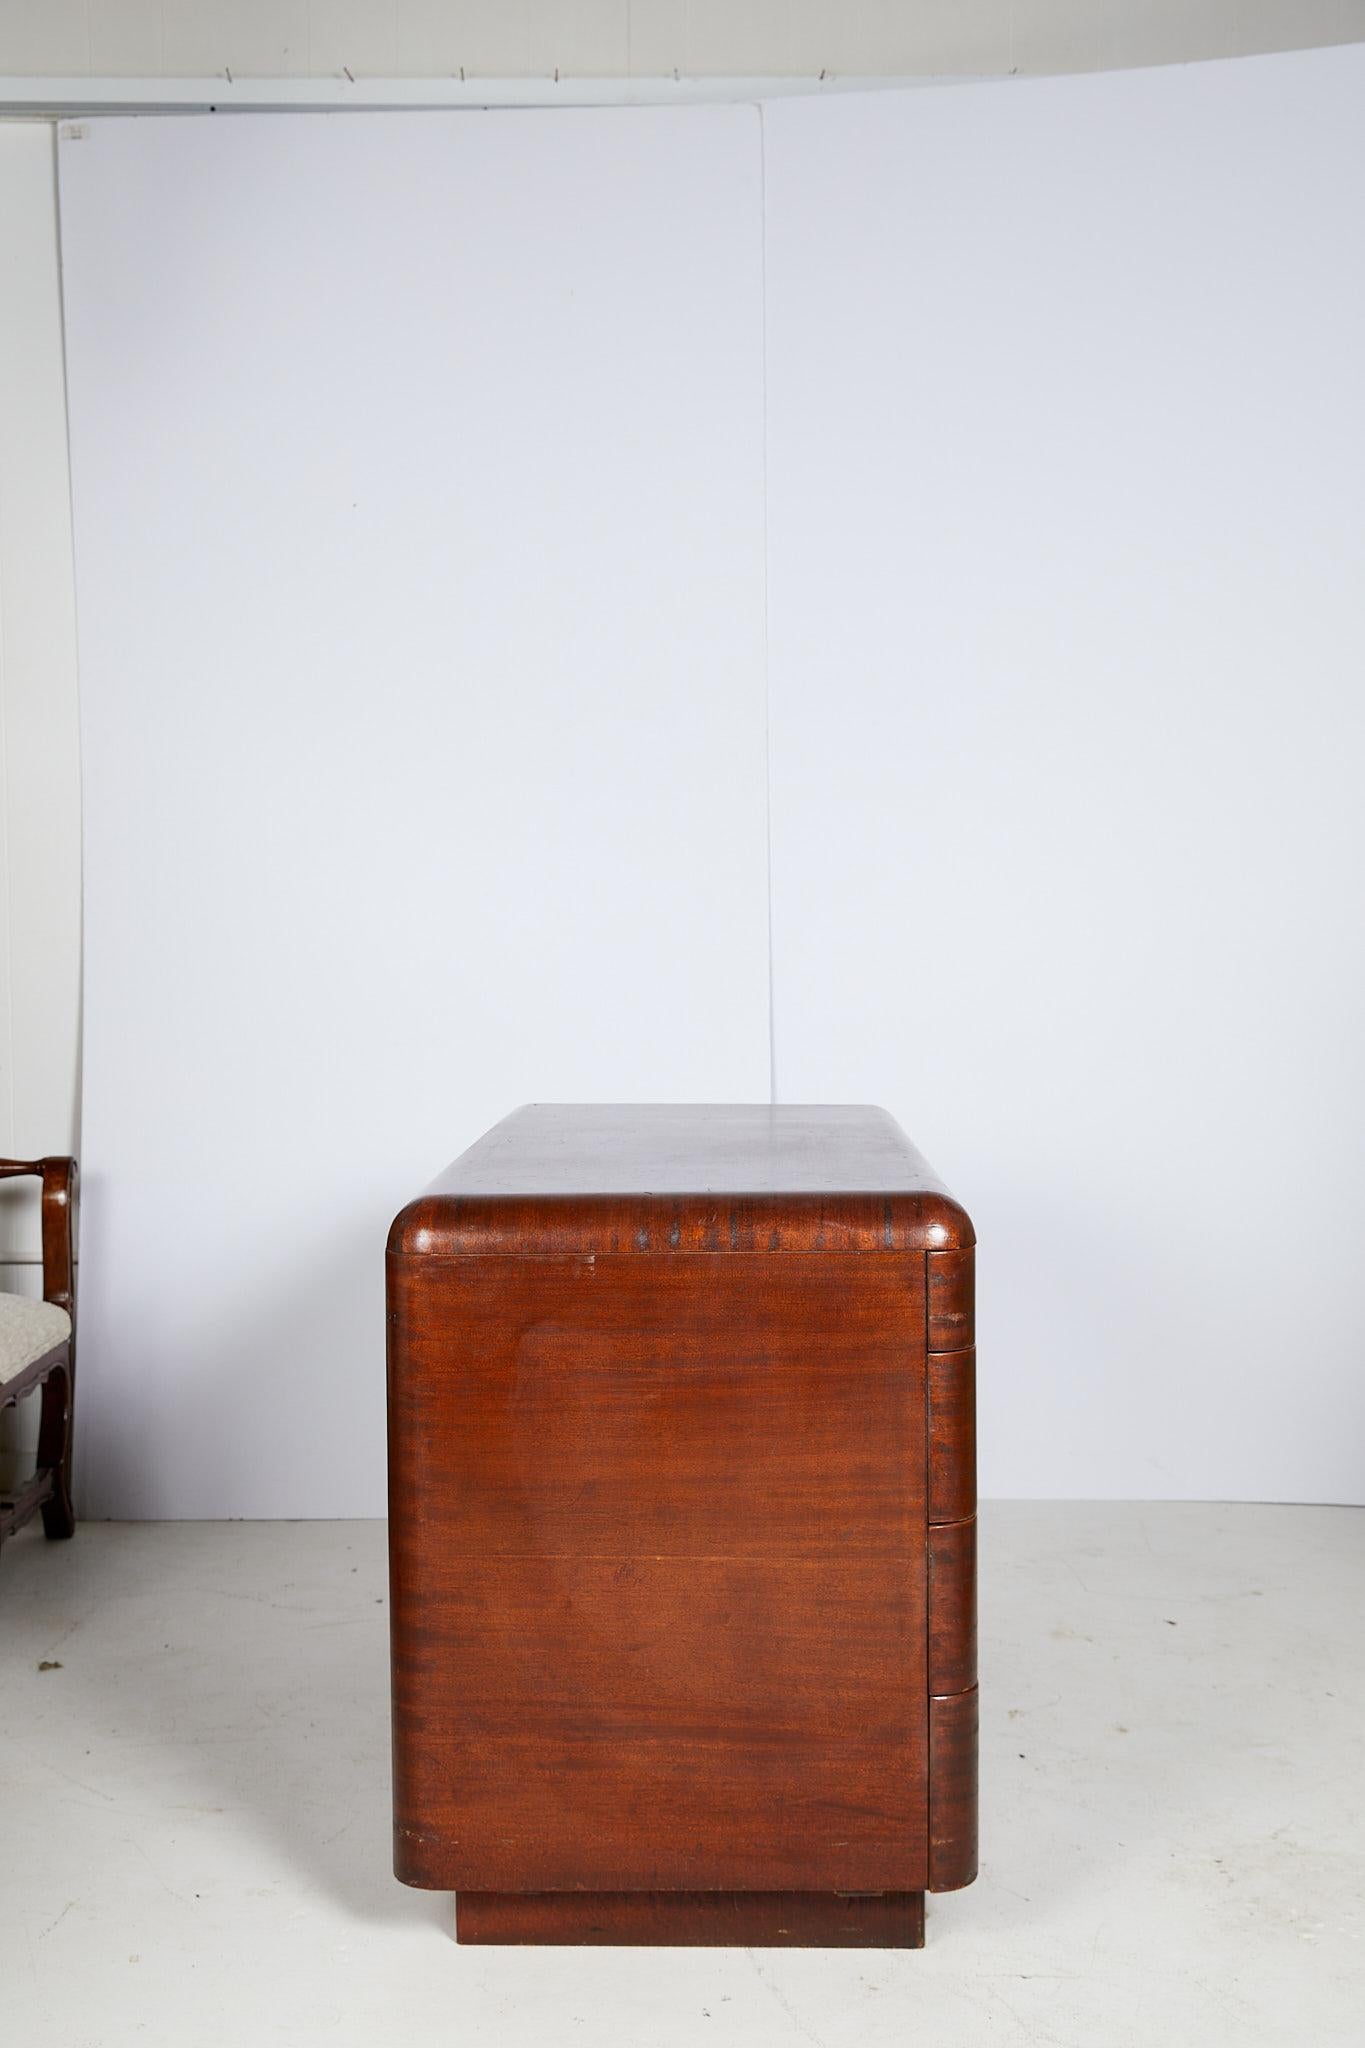 20th Century Art Deco Streamlined Bentwood Pedestal Desk by Paul Goldman for Plymold Co.